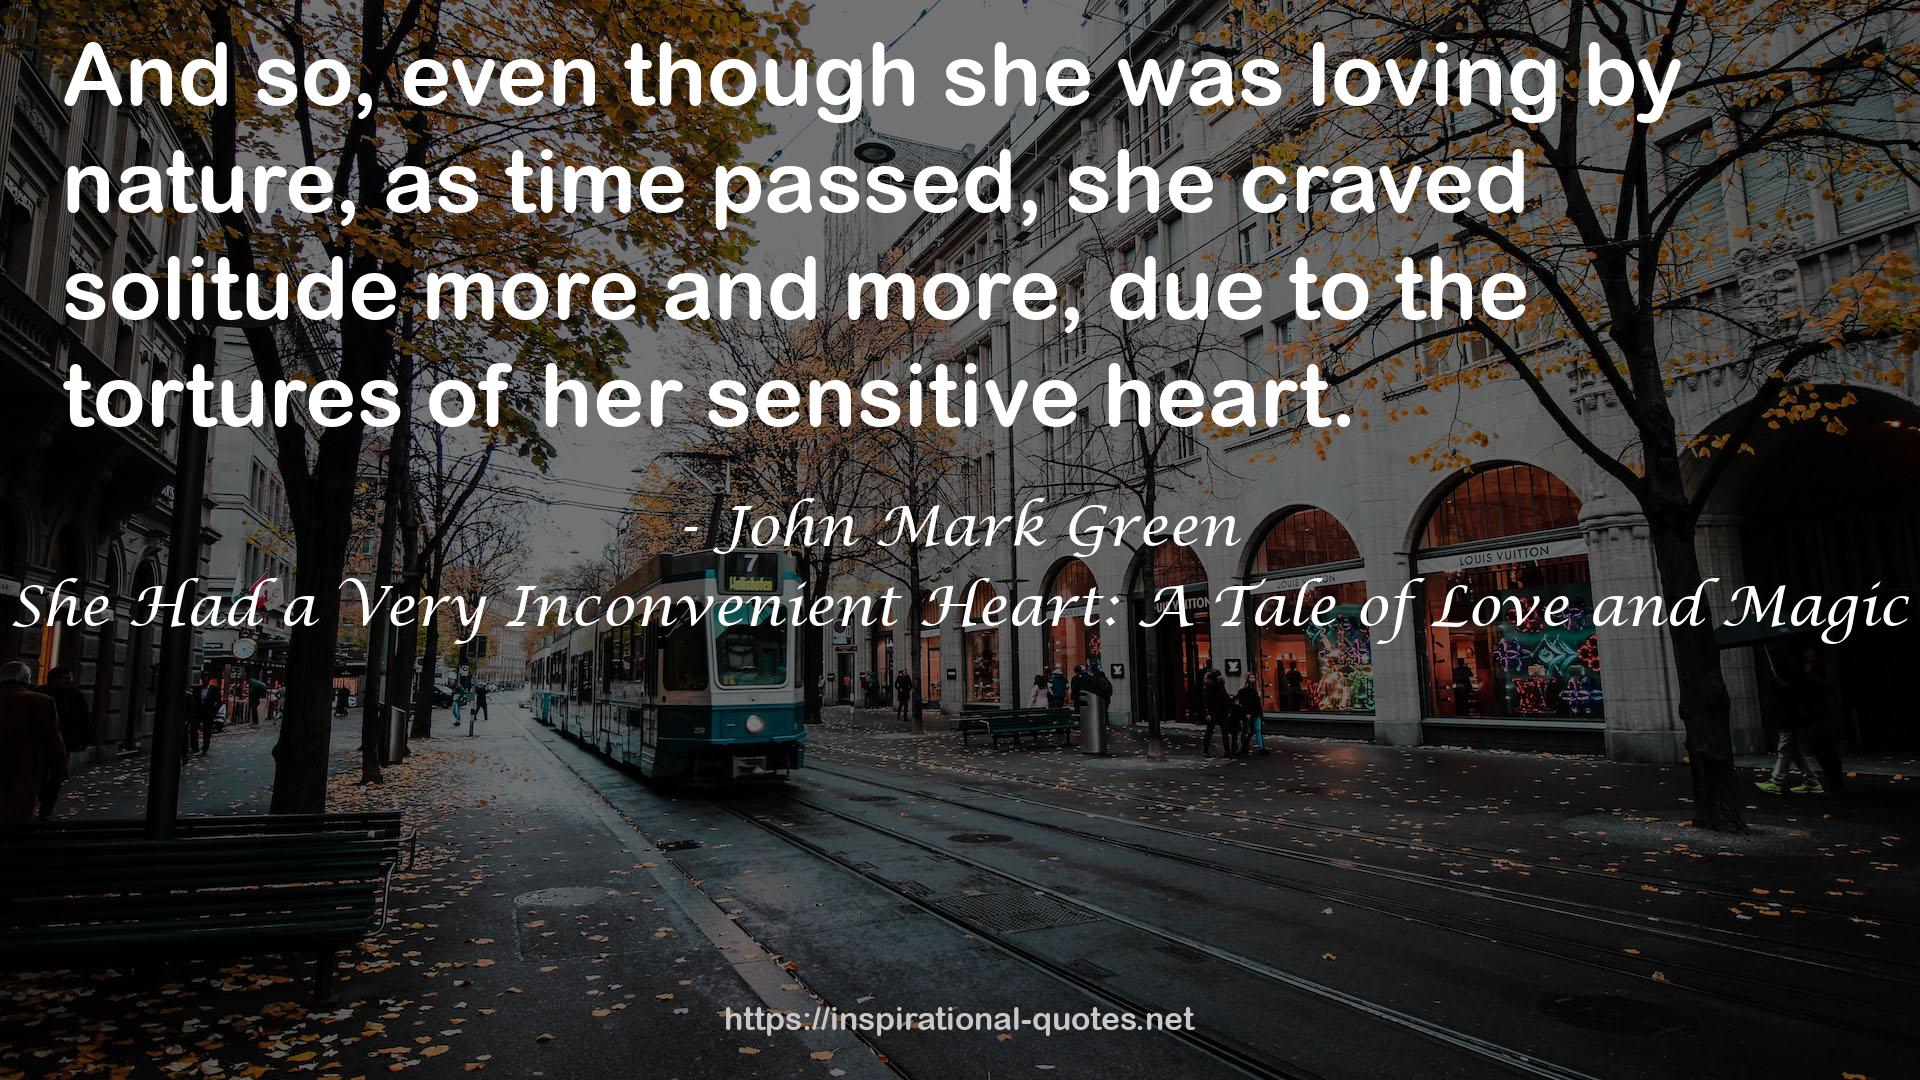 She Had a Very Inconvenient Heart: A Tale of Love and Magic QUOTES